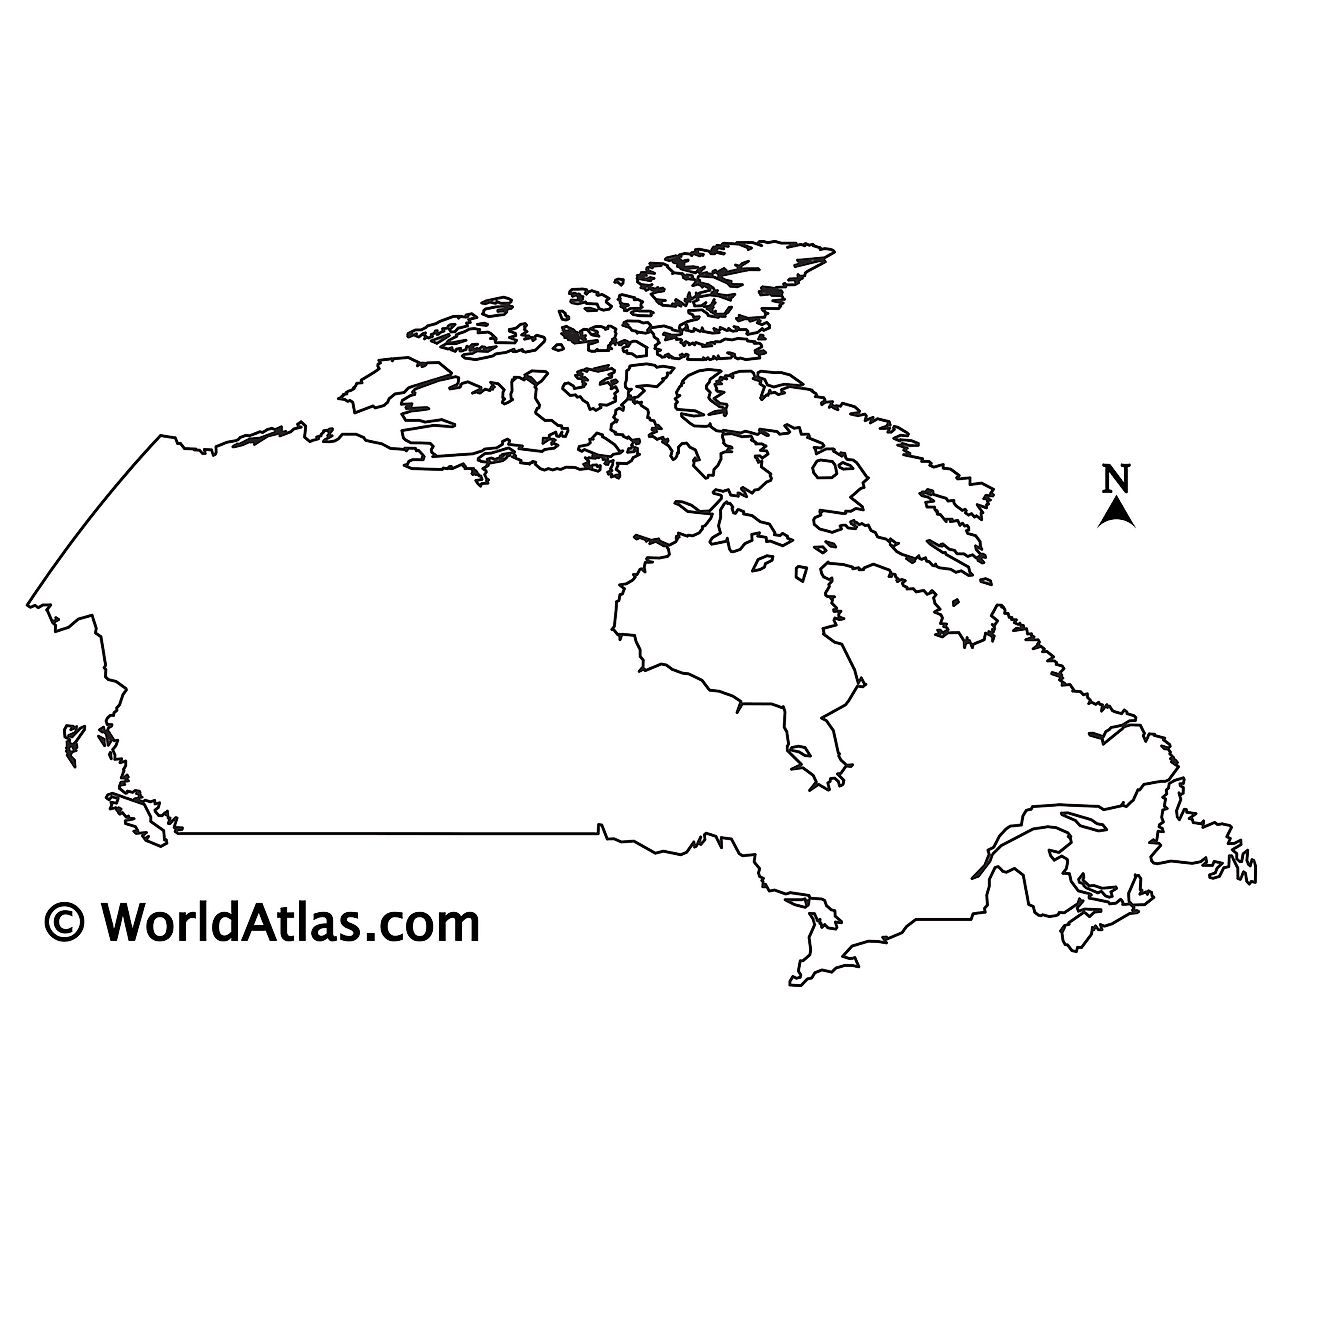 Blank outline map of Canada